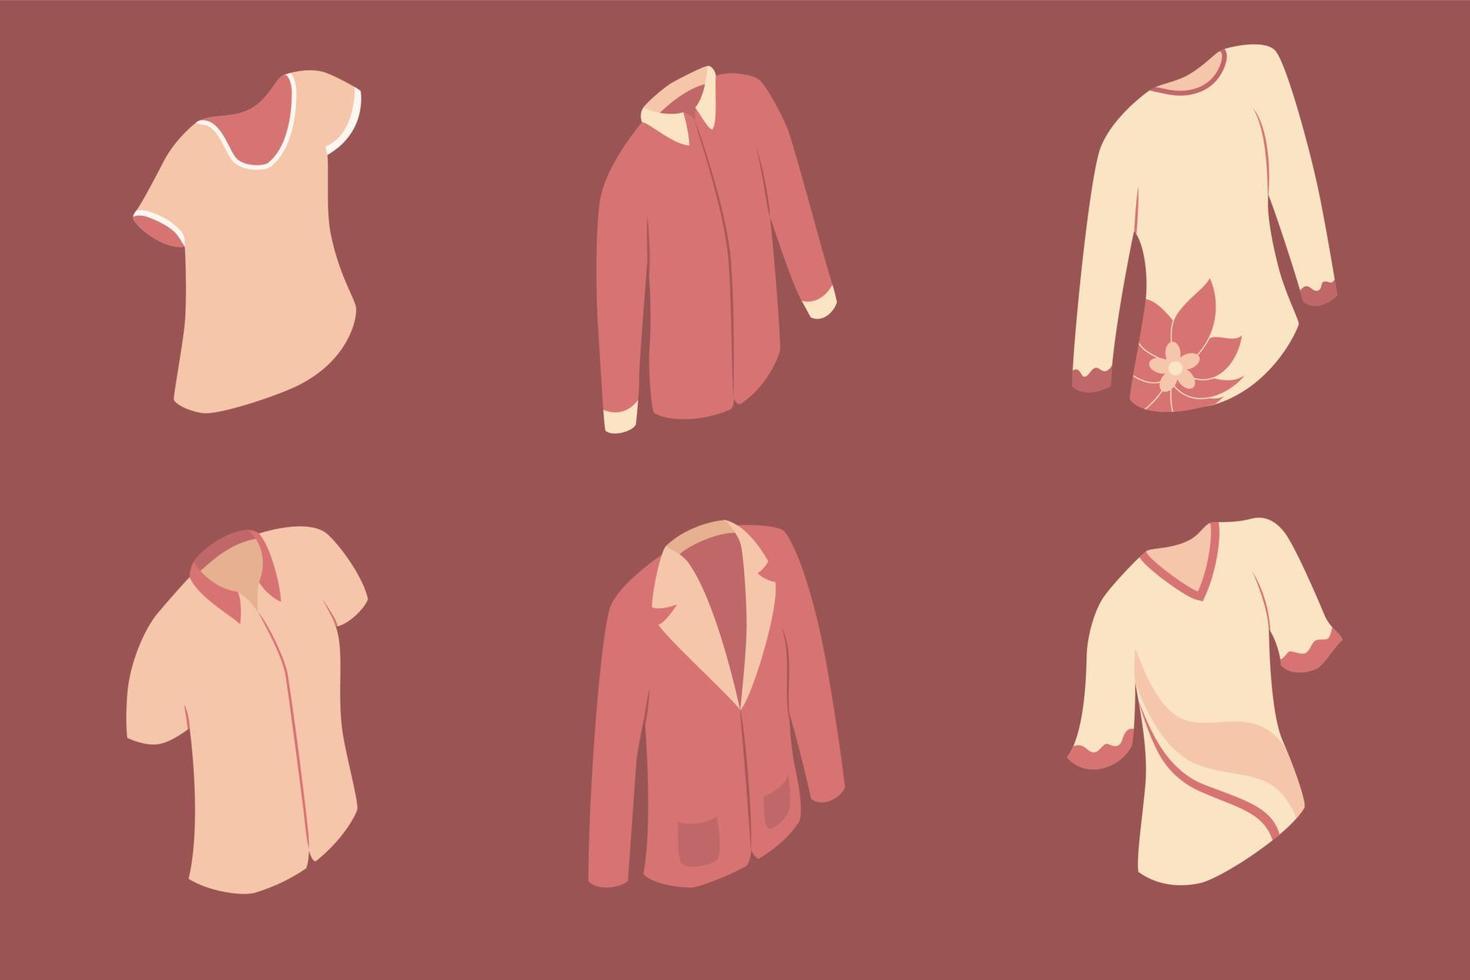 clothes set collection with isometric style and red tone color vector